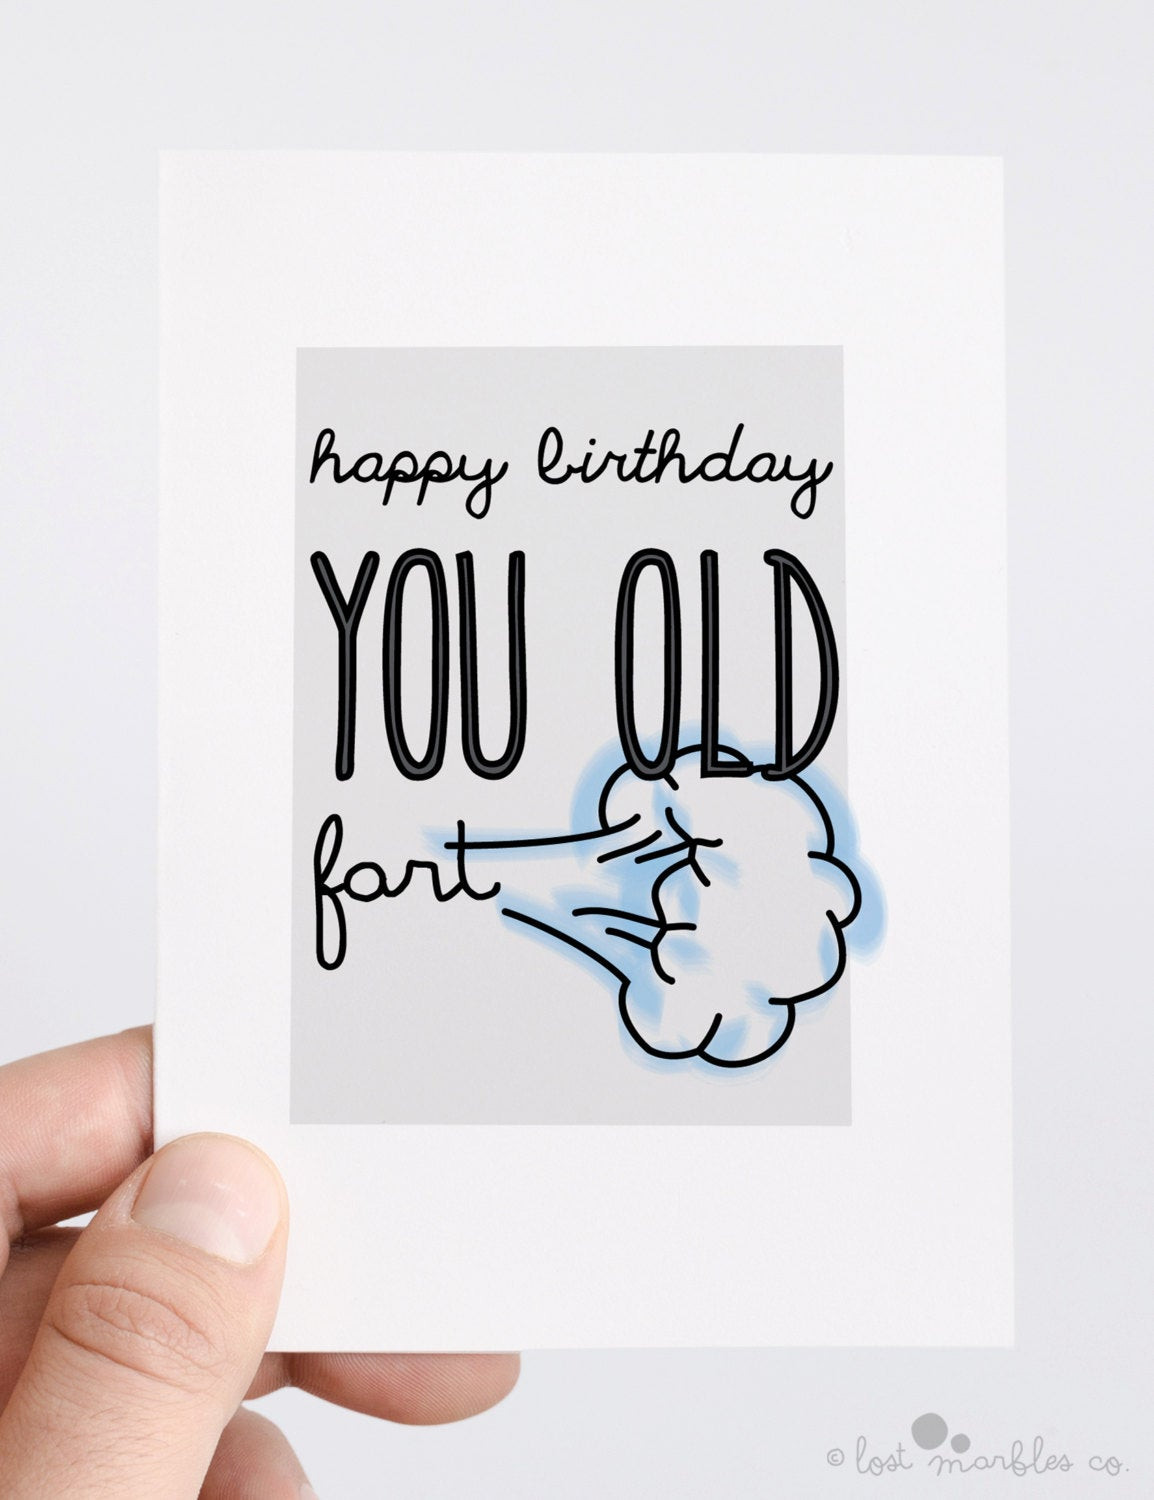 Rude Birthday Wishes
 Rude Birthday Card Funny Birthday Card His by LostMarblesCo